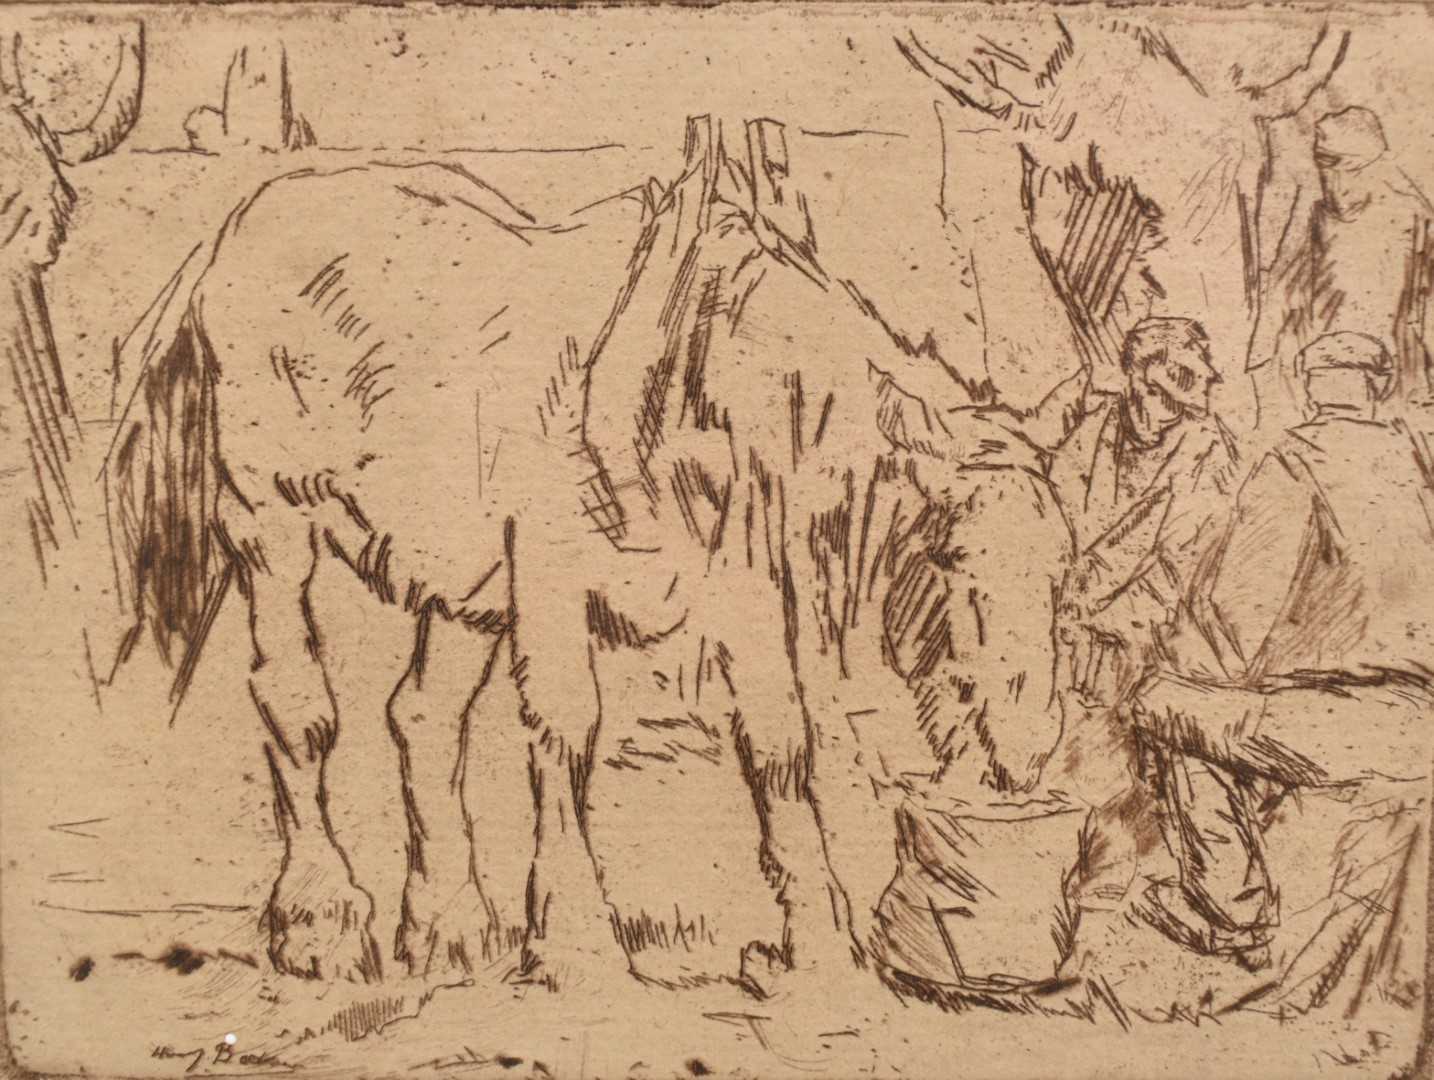 Lot 1193 - Harry Becker (1865-1928) etching - Horse Drinking from a Bucket, 11.5cm x 15cm, in glazed frame